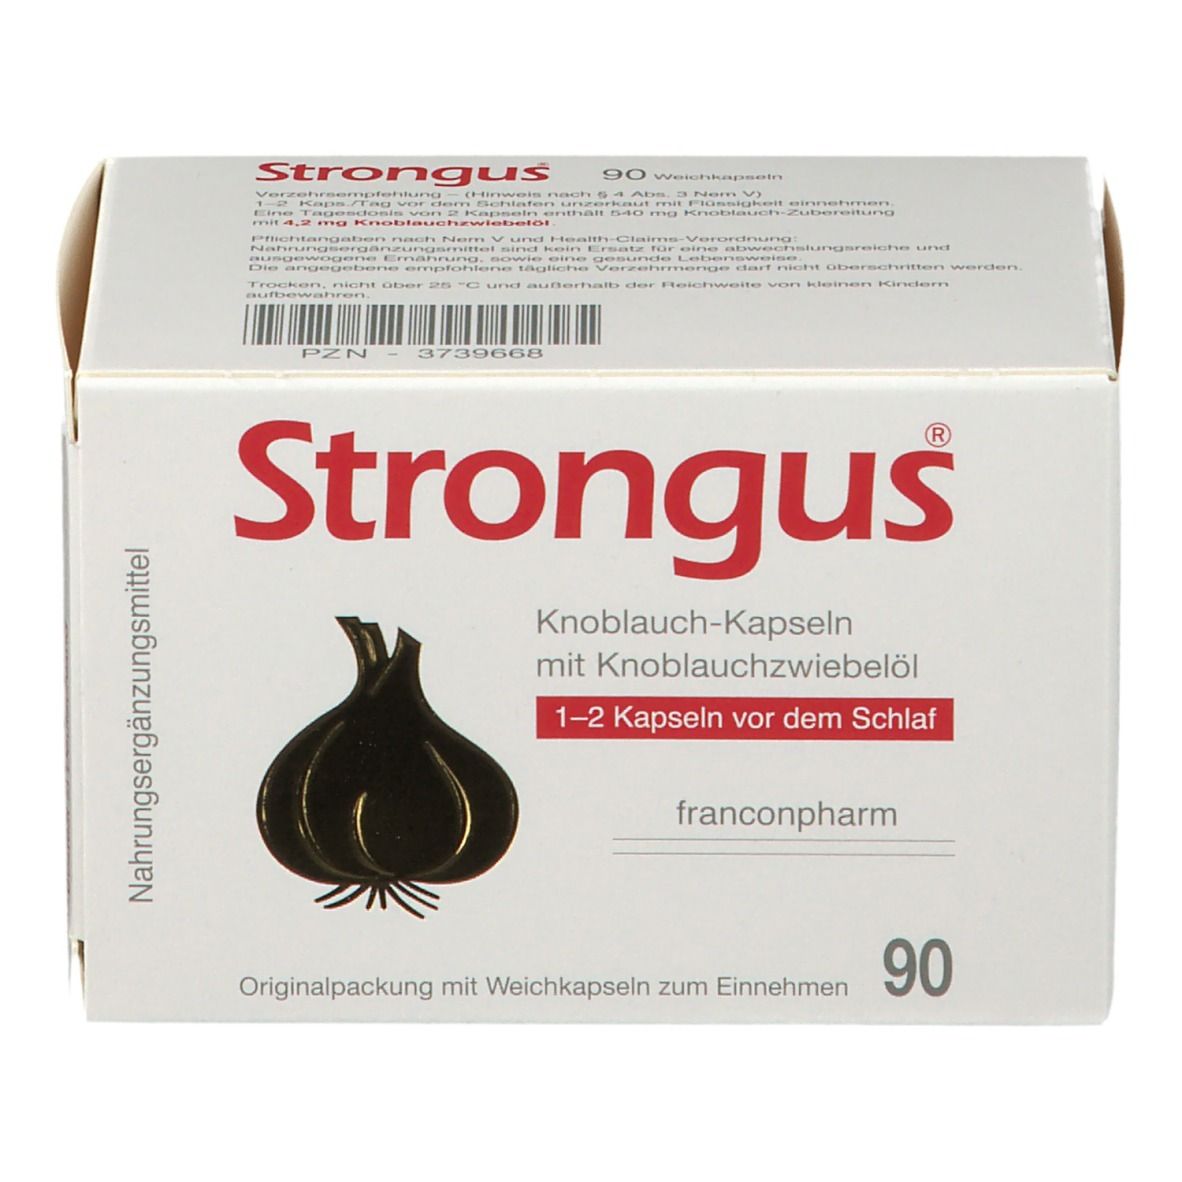 Strongus® Strongus® Capsules d'ail